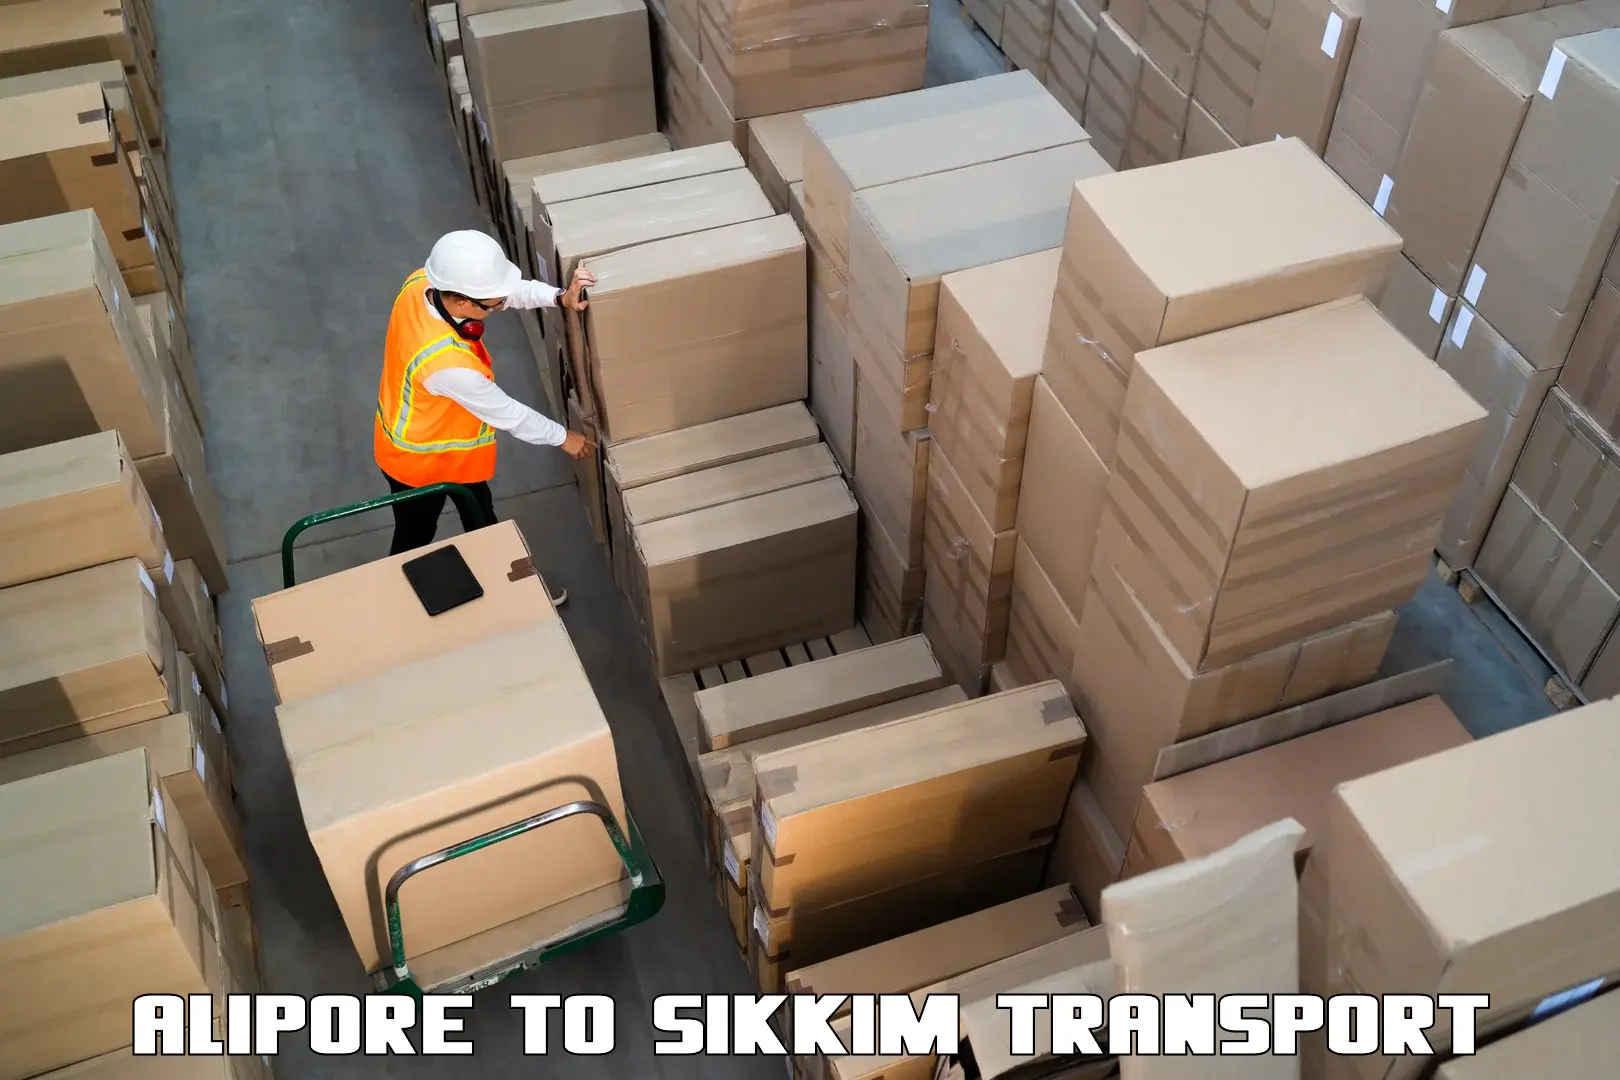 Pick up transport service Alipore to Sikkim